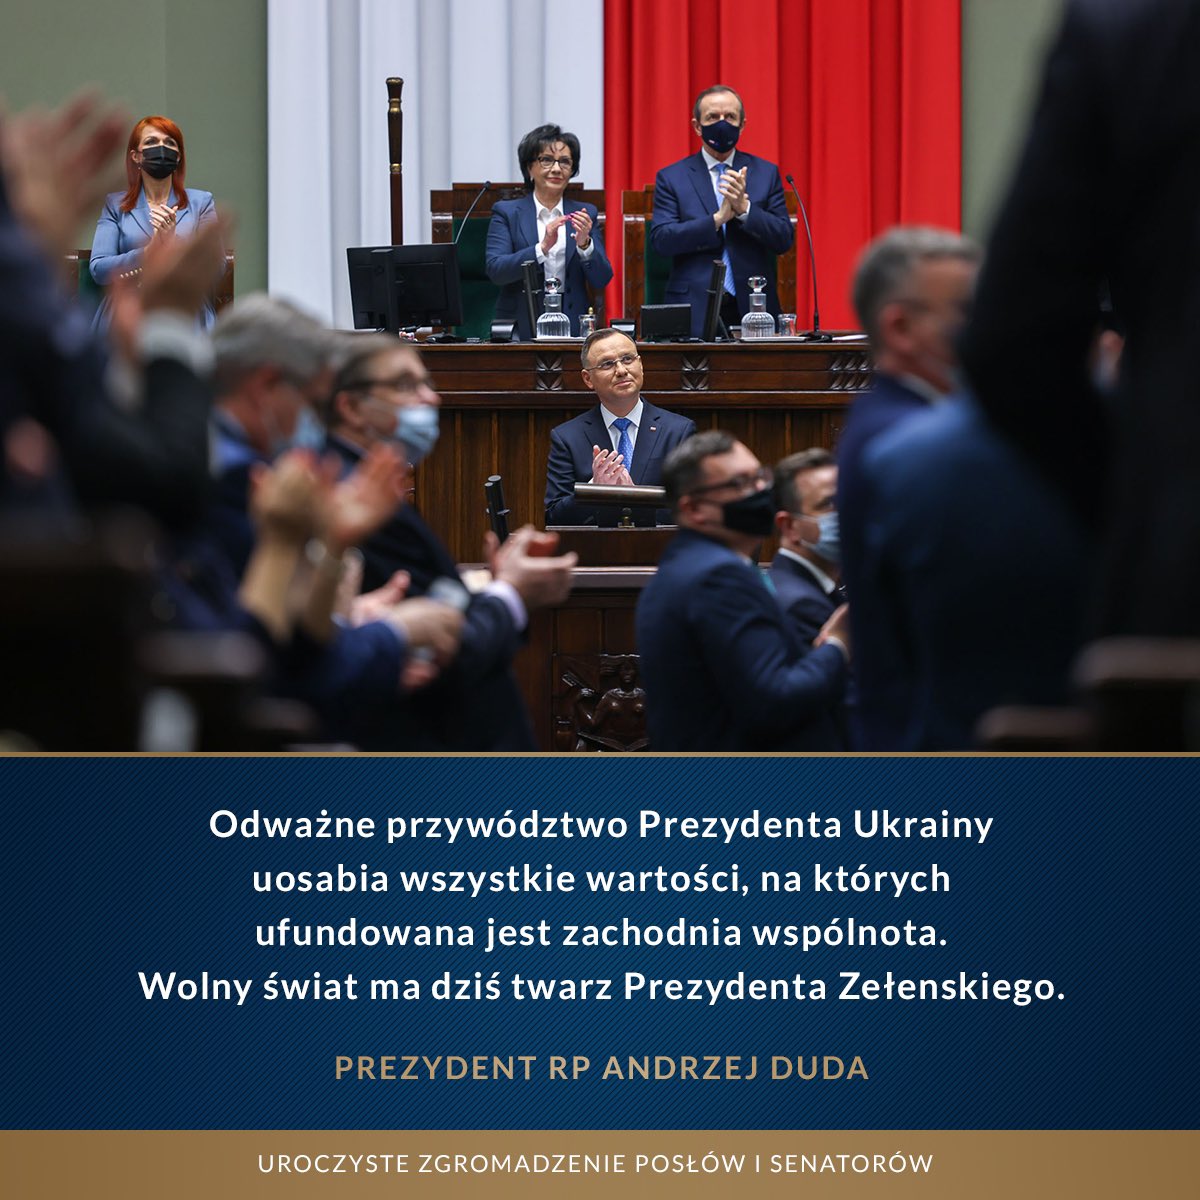 The free world has a face today, and it is @ZelenskyyUa - President @AndrzejDuda